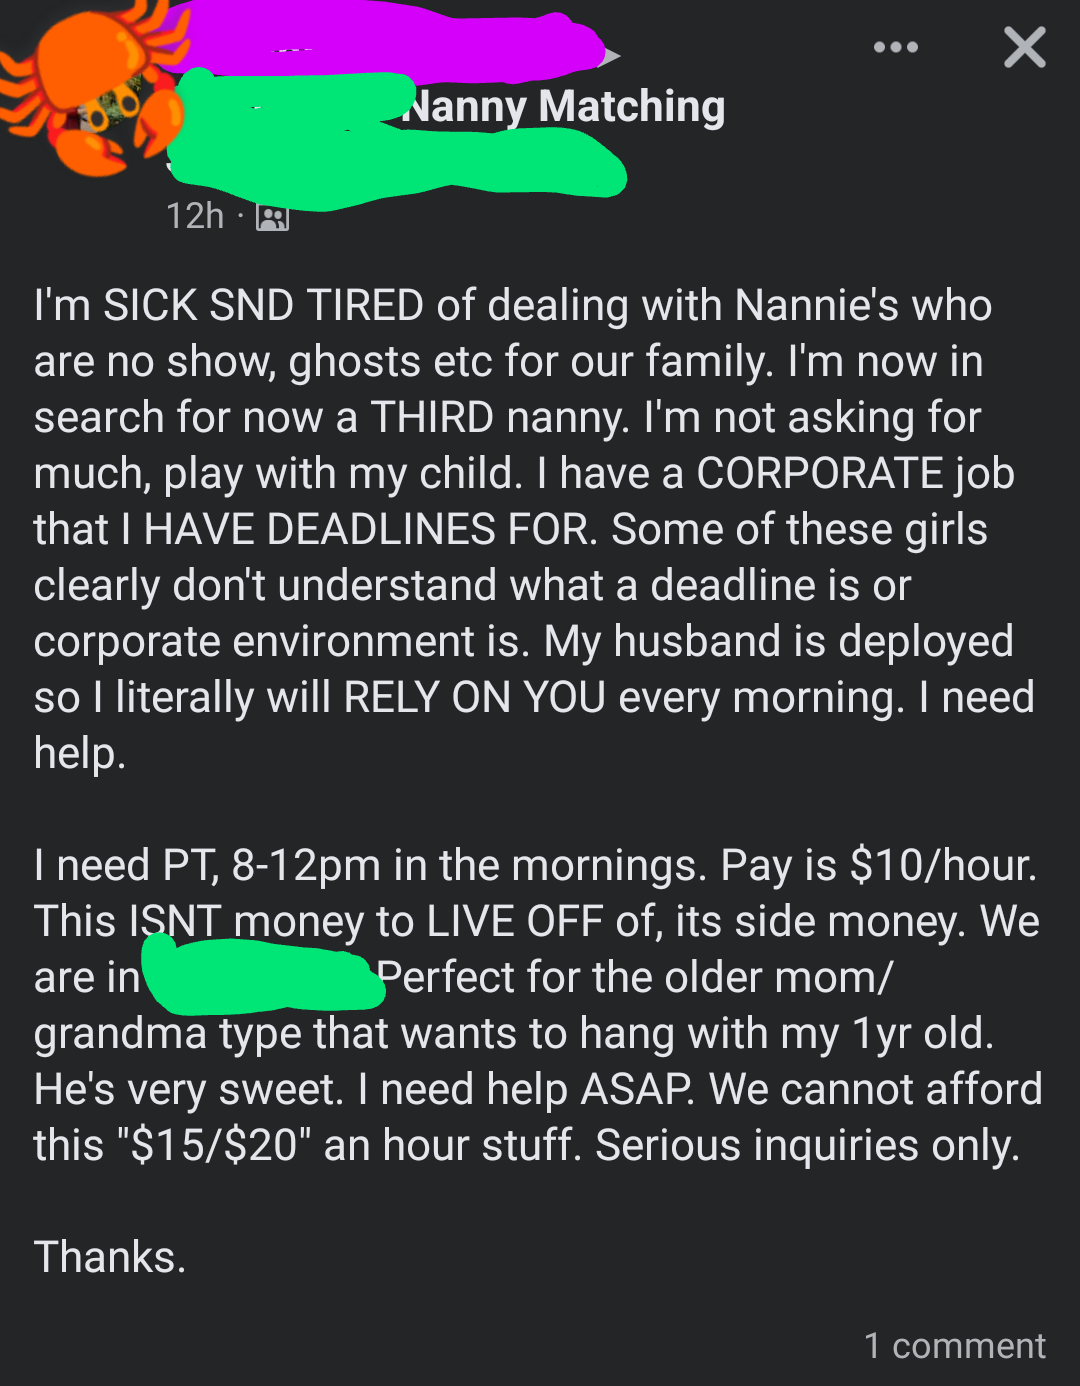 Job posting ending with, &quot;Perfect for the older mom/grandma type that wants to hang with my 1yr old. He&#x27;s very sweet. I need help ASAP. We cannot afford this &#x27;$15/$20&#x27; an hour stuff. Serious inquiries only.&quot;